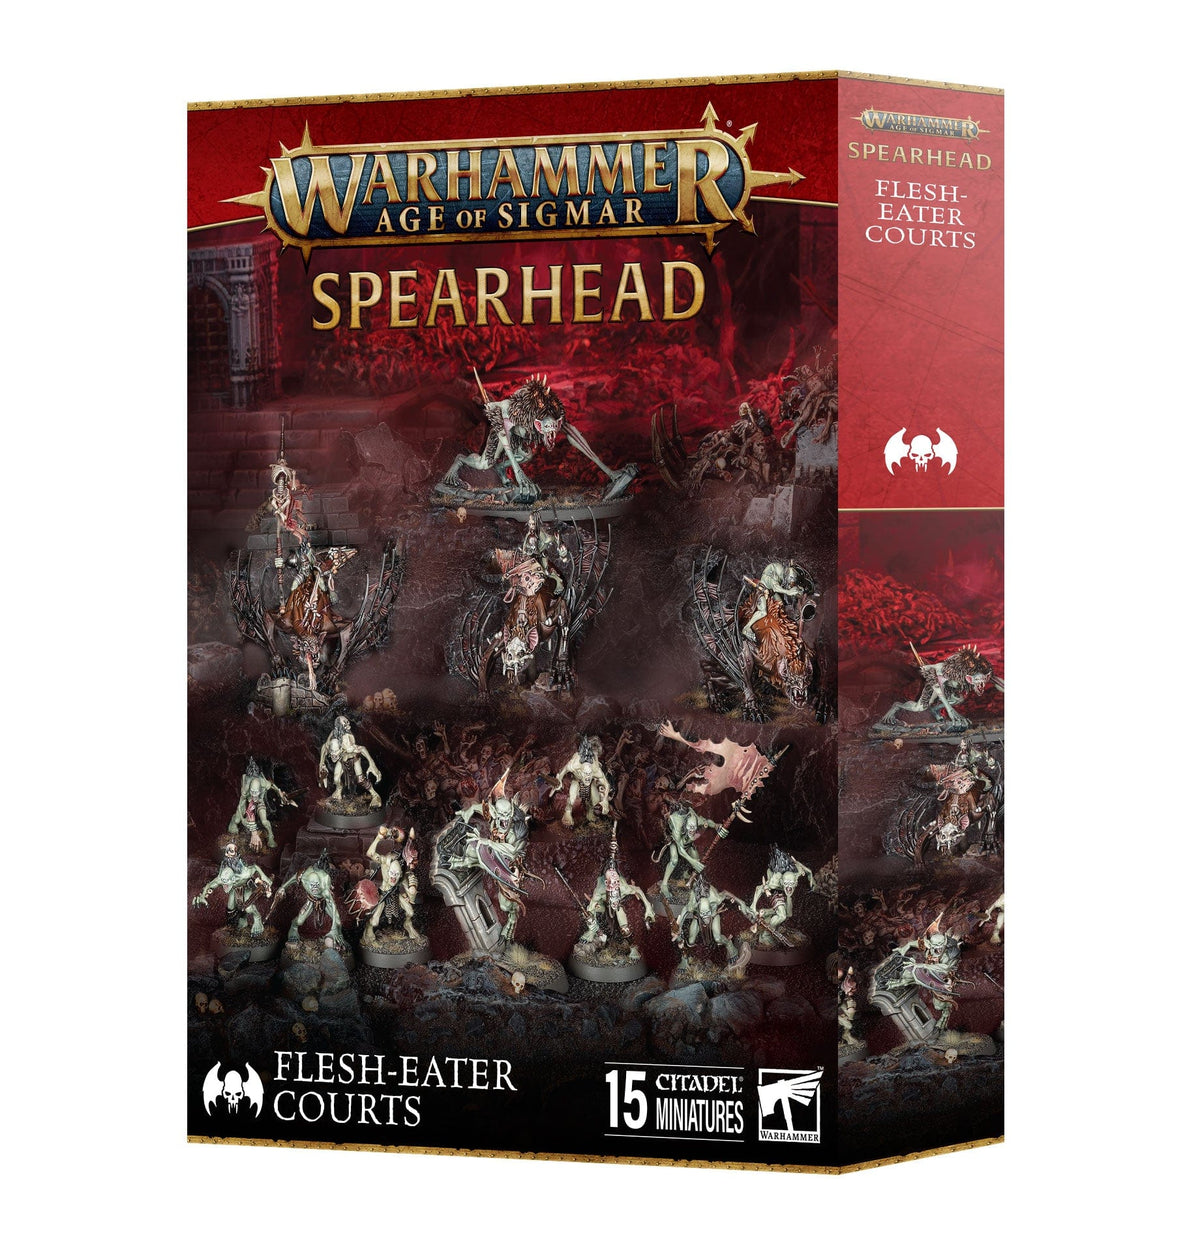 Warhammer: Age of Sigmar - Spearhead: Flesh-eater Courts